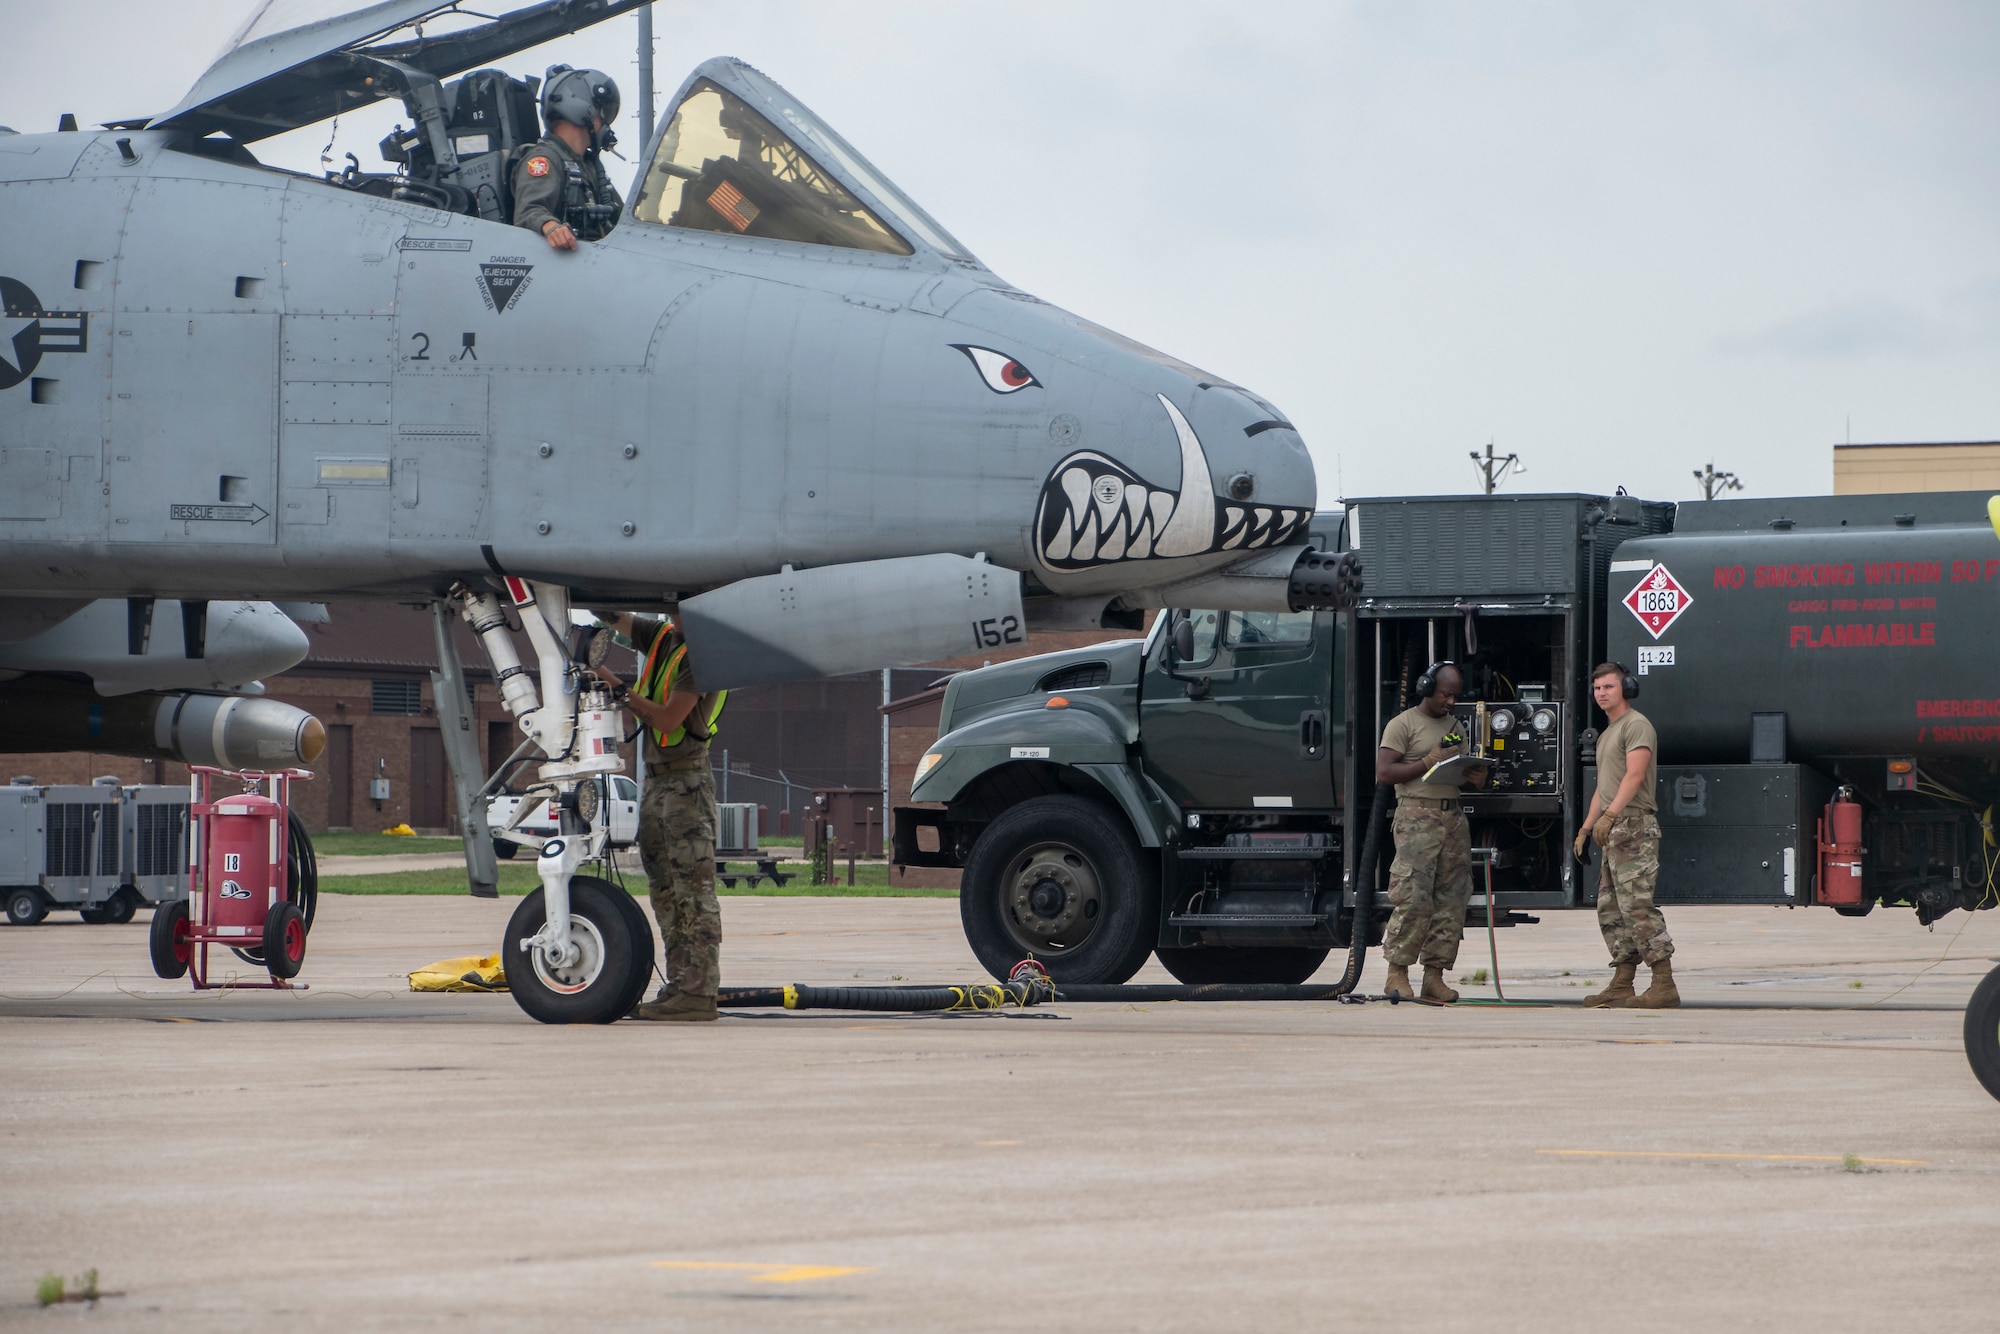 Airmen in camo uniforms prepare to pump gas from a green truck into a gray fighter aircraft with teeth painted on nose.